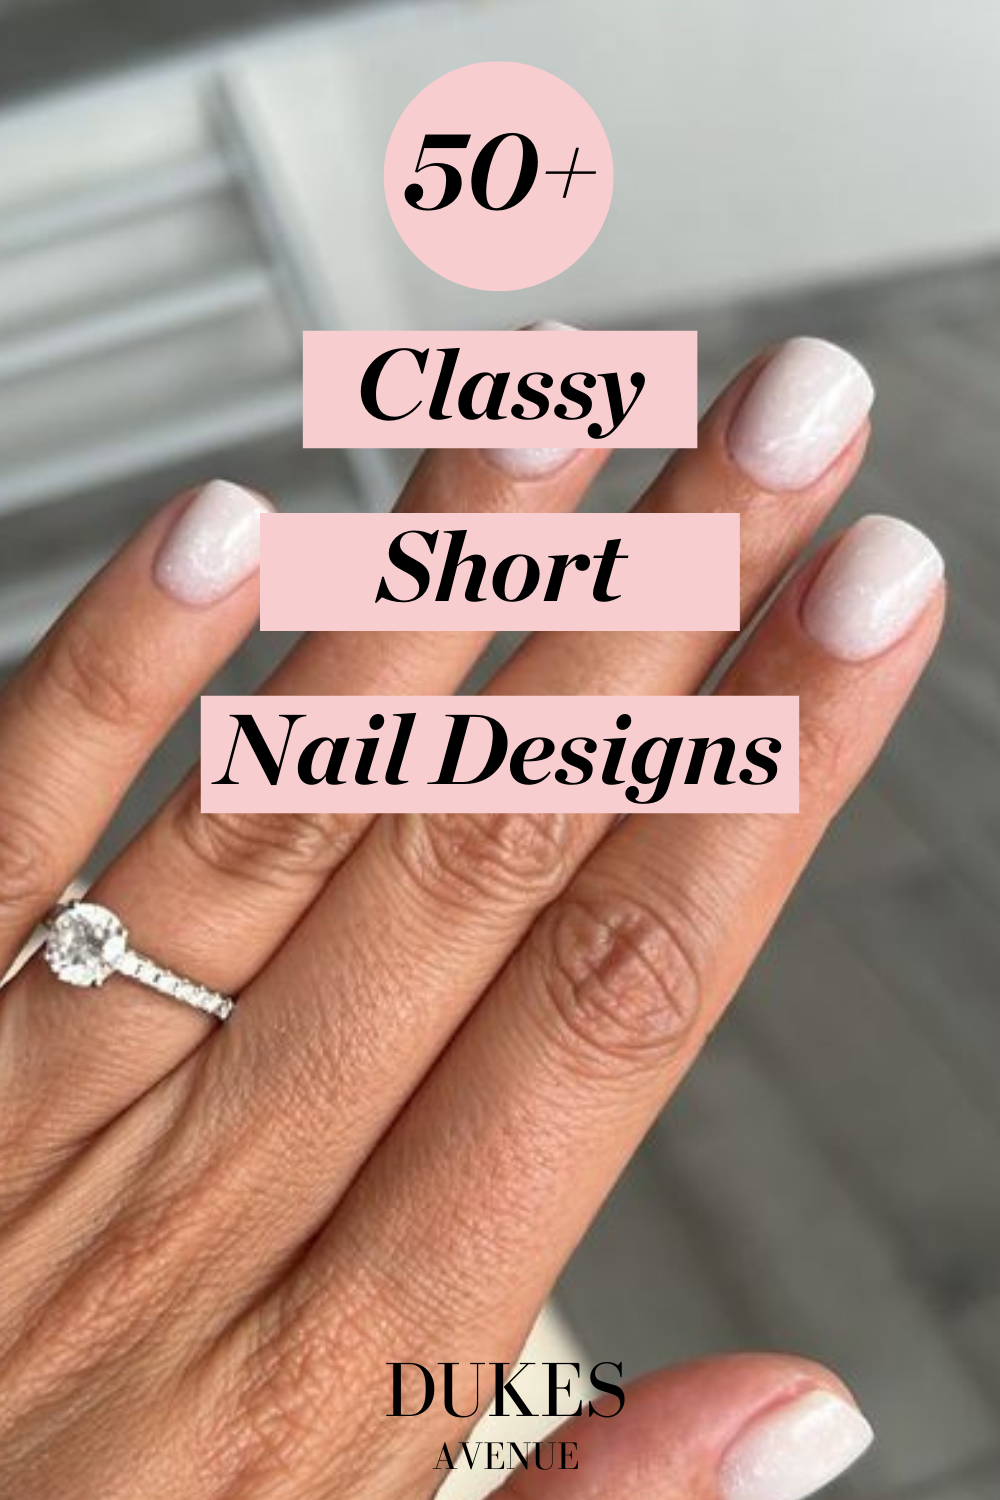 50+ Classy Short Nail Designs You'll Absolutely Love